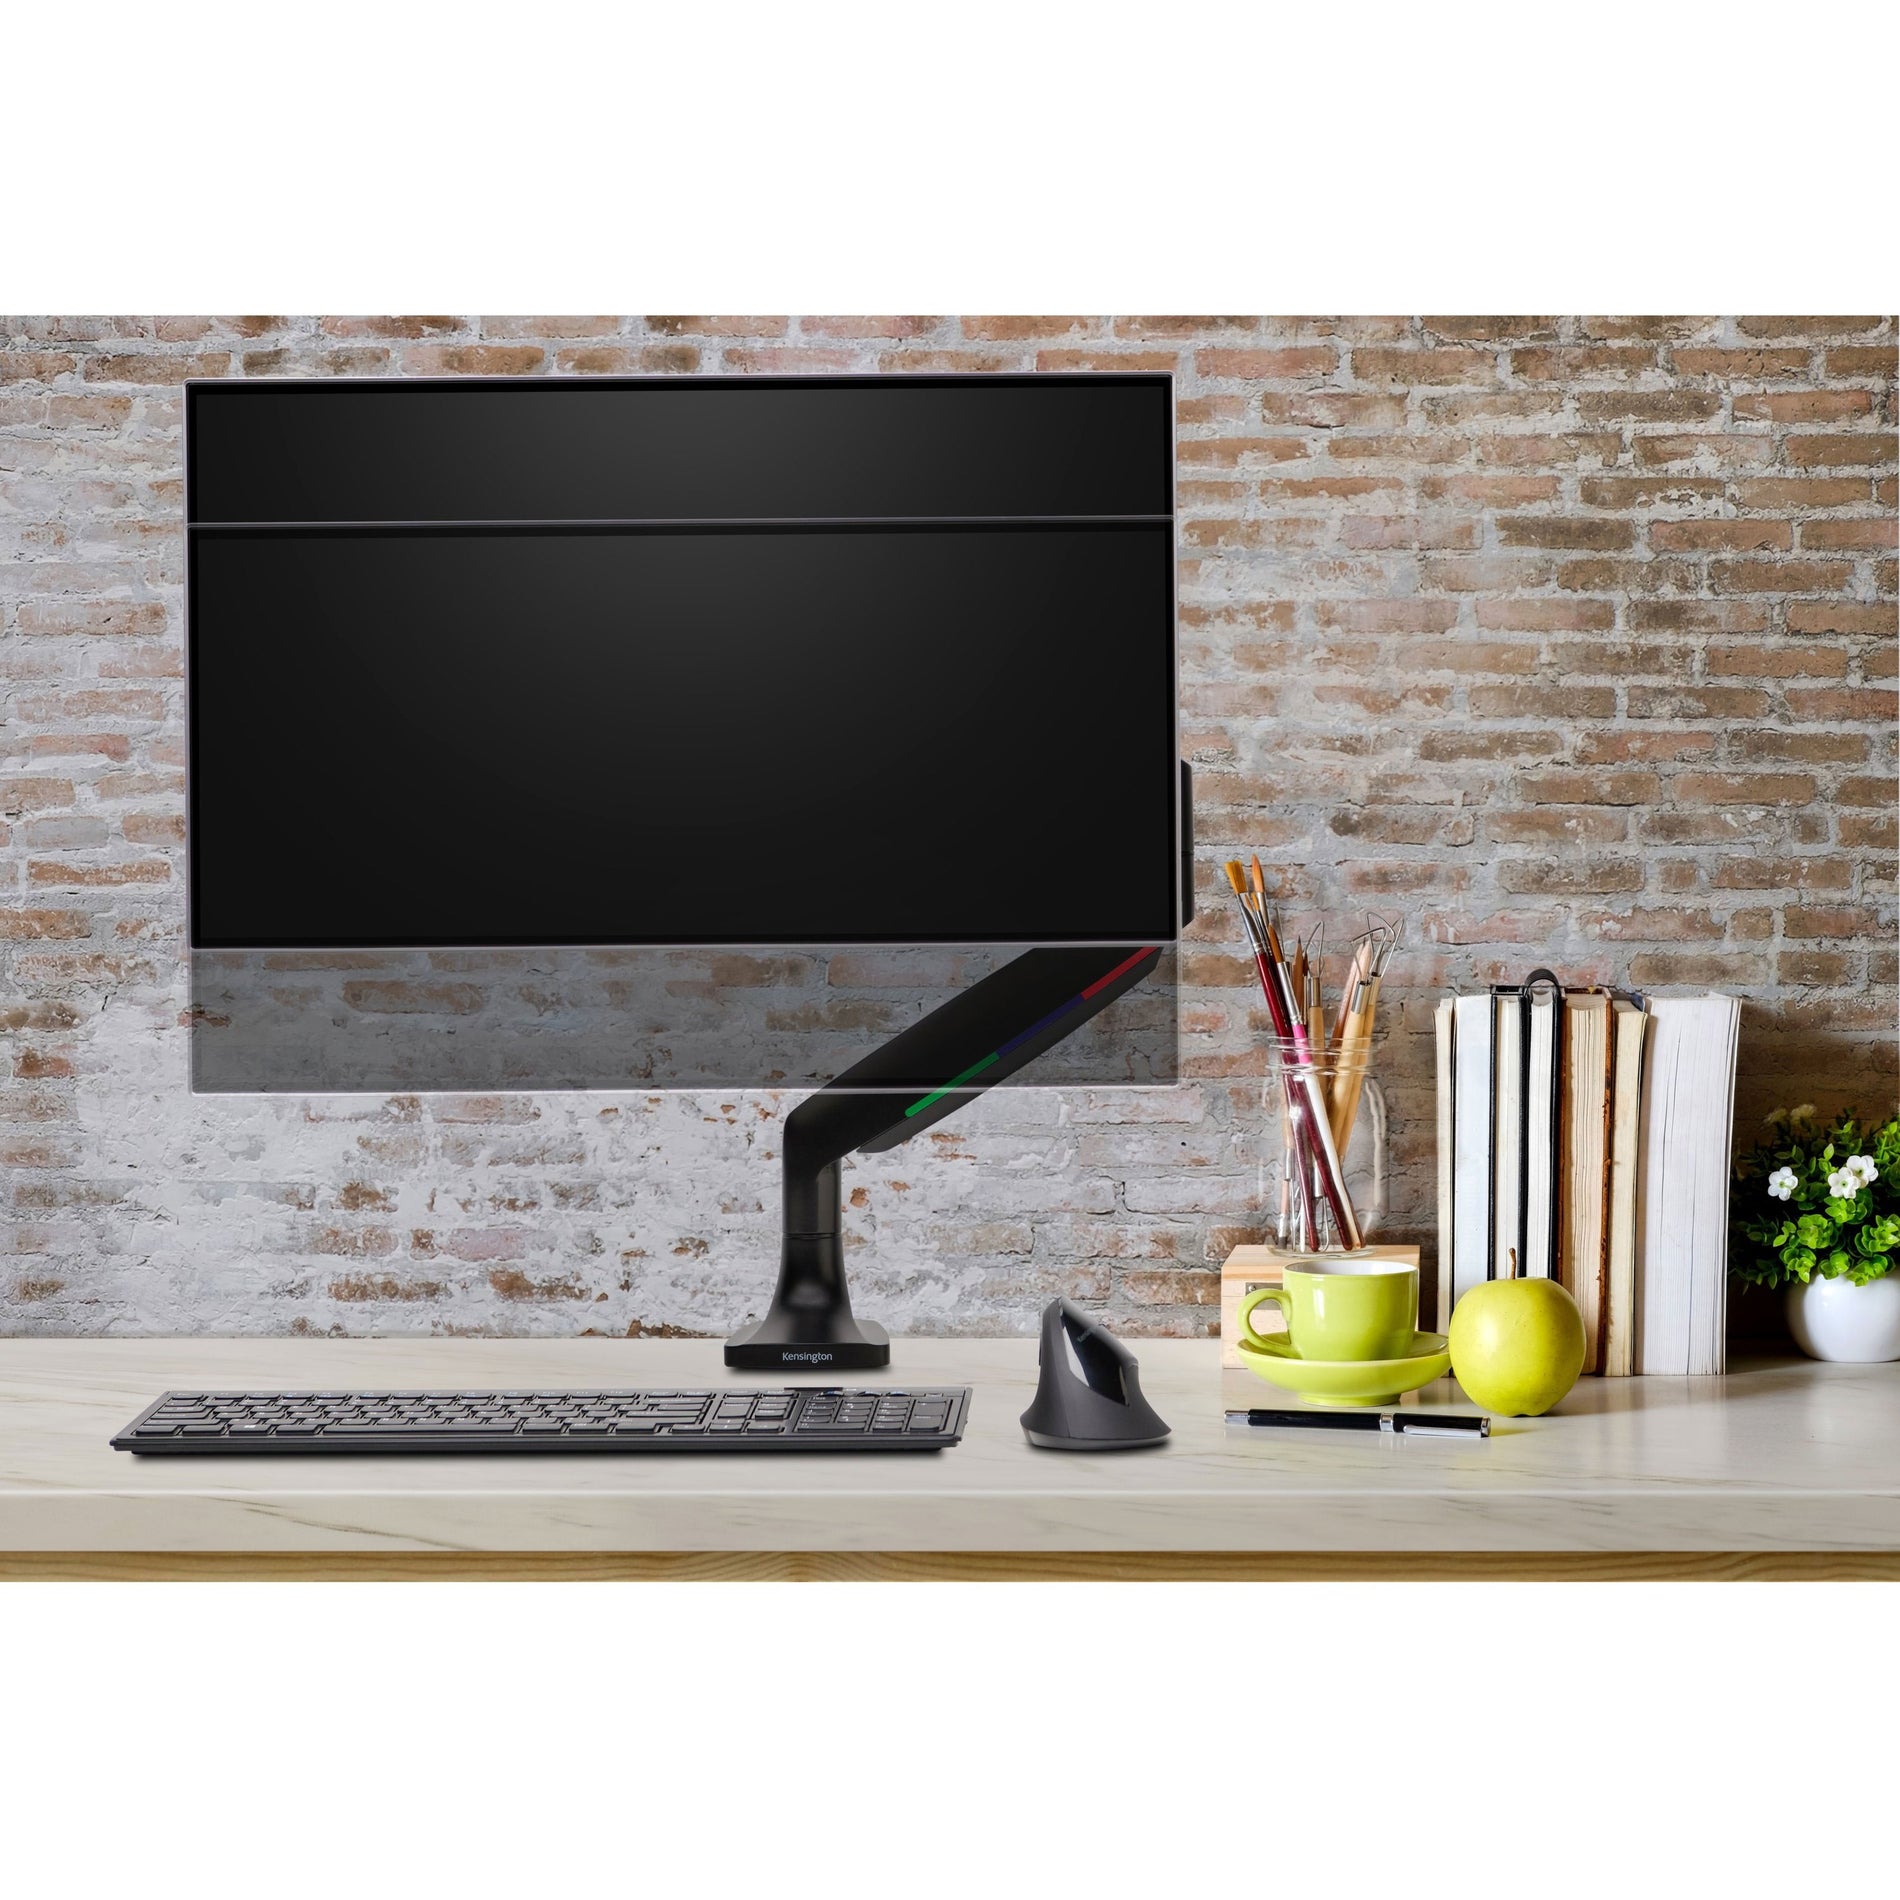 Kensington K59600WW SmartFit One-Touch Height Adjustable Single Monitor Arm, Black - Gas Spring, Articulating, Cable Management